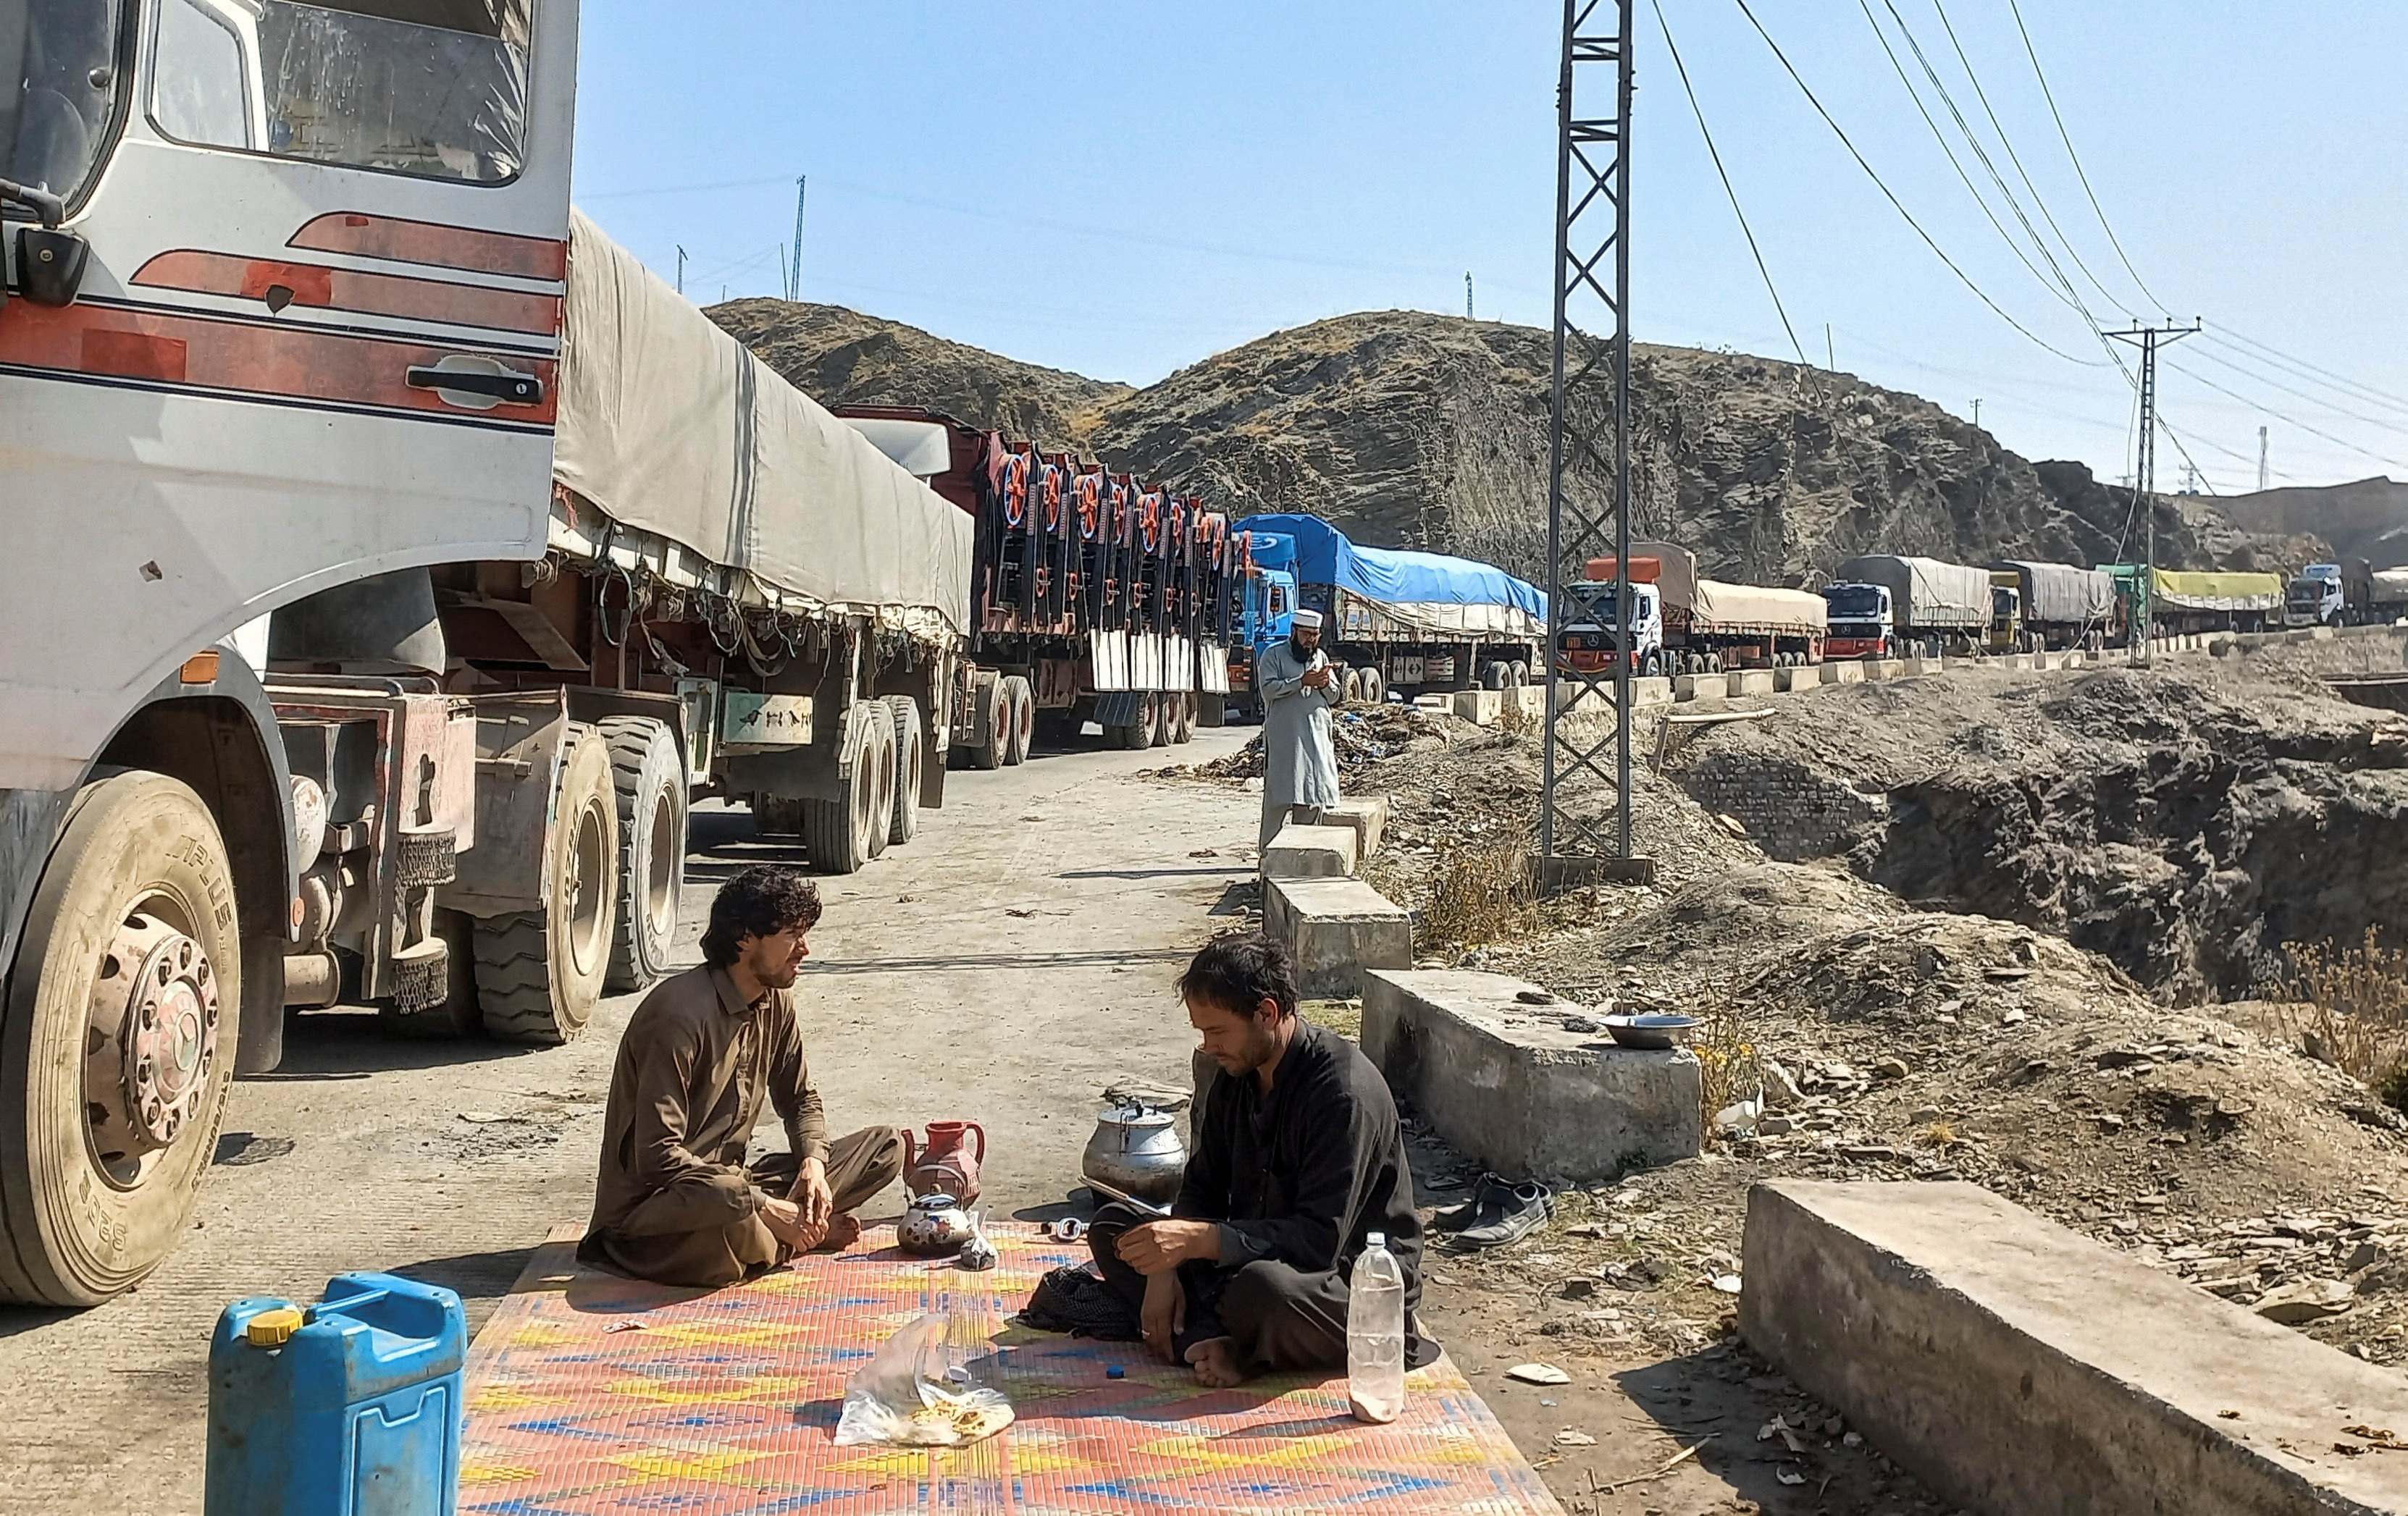 Men sit near a queue of trucks loaded with supplies to leave for Afghanistan, after Taliban authorities have closed the main border crossing in Torkham